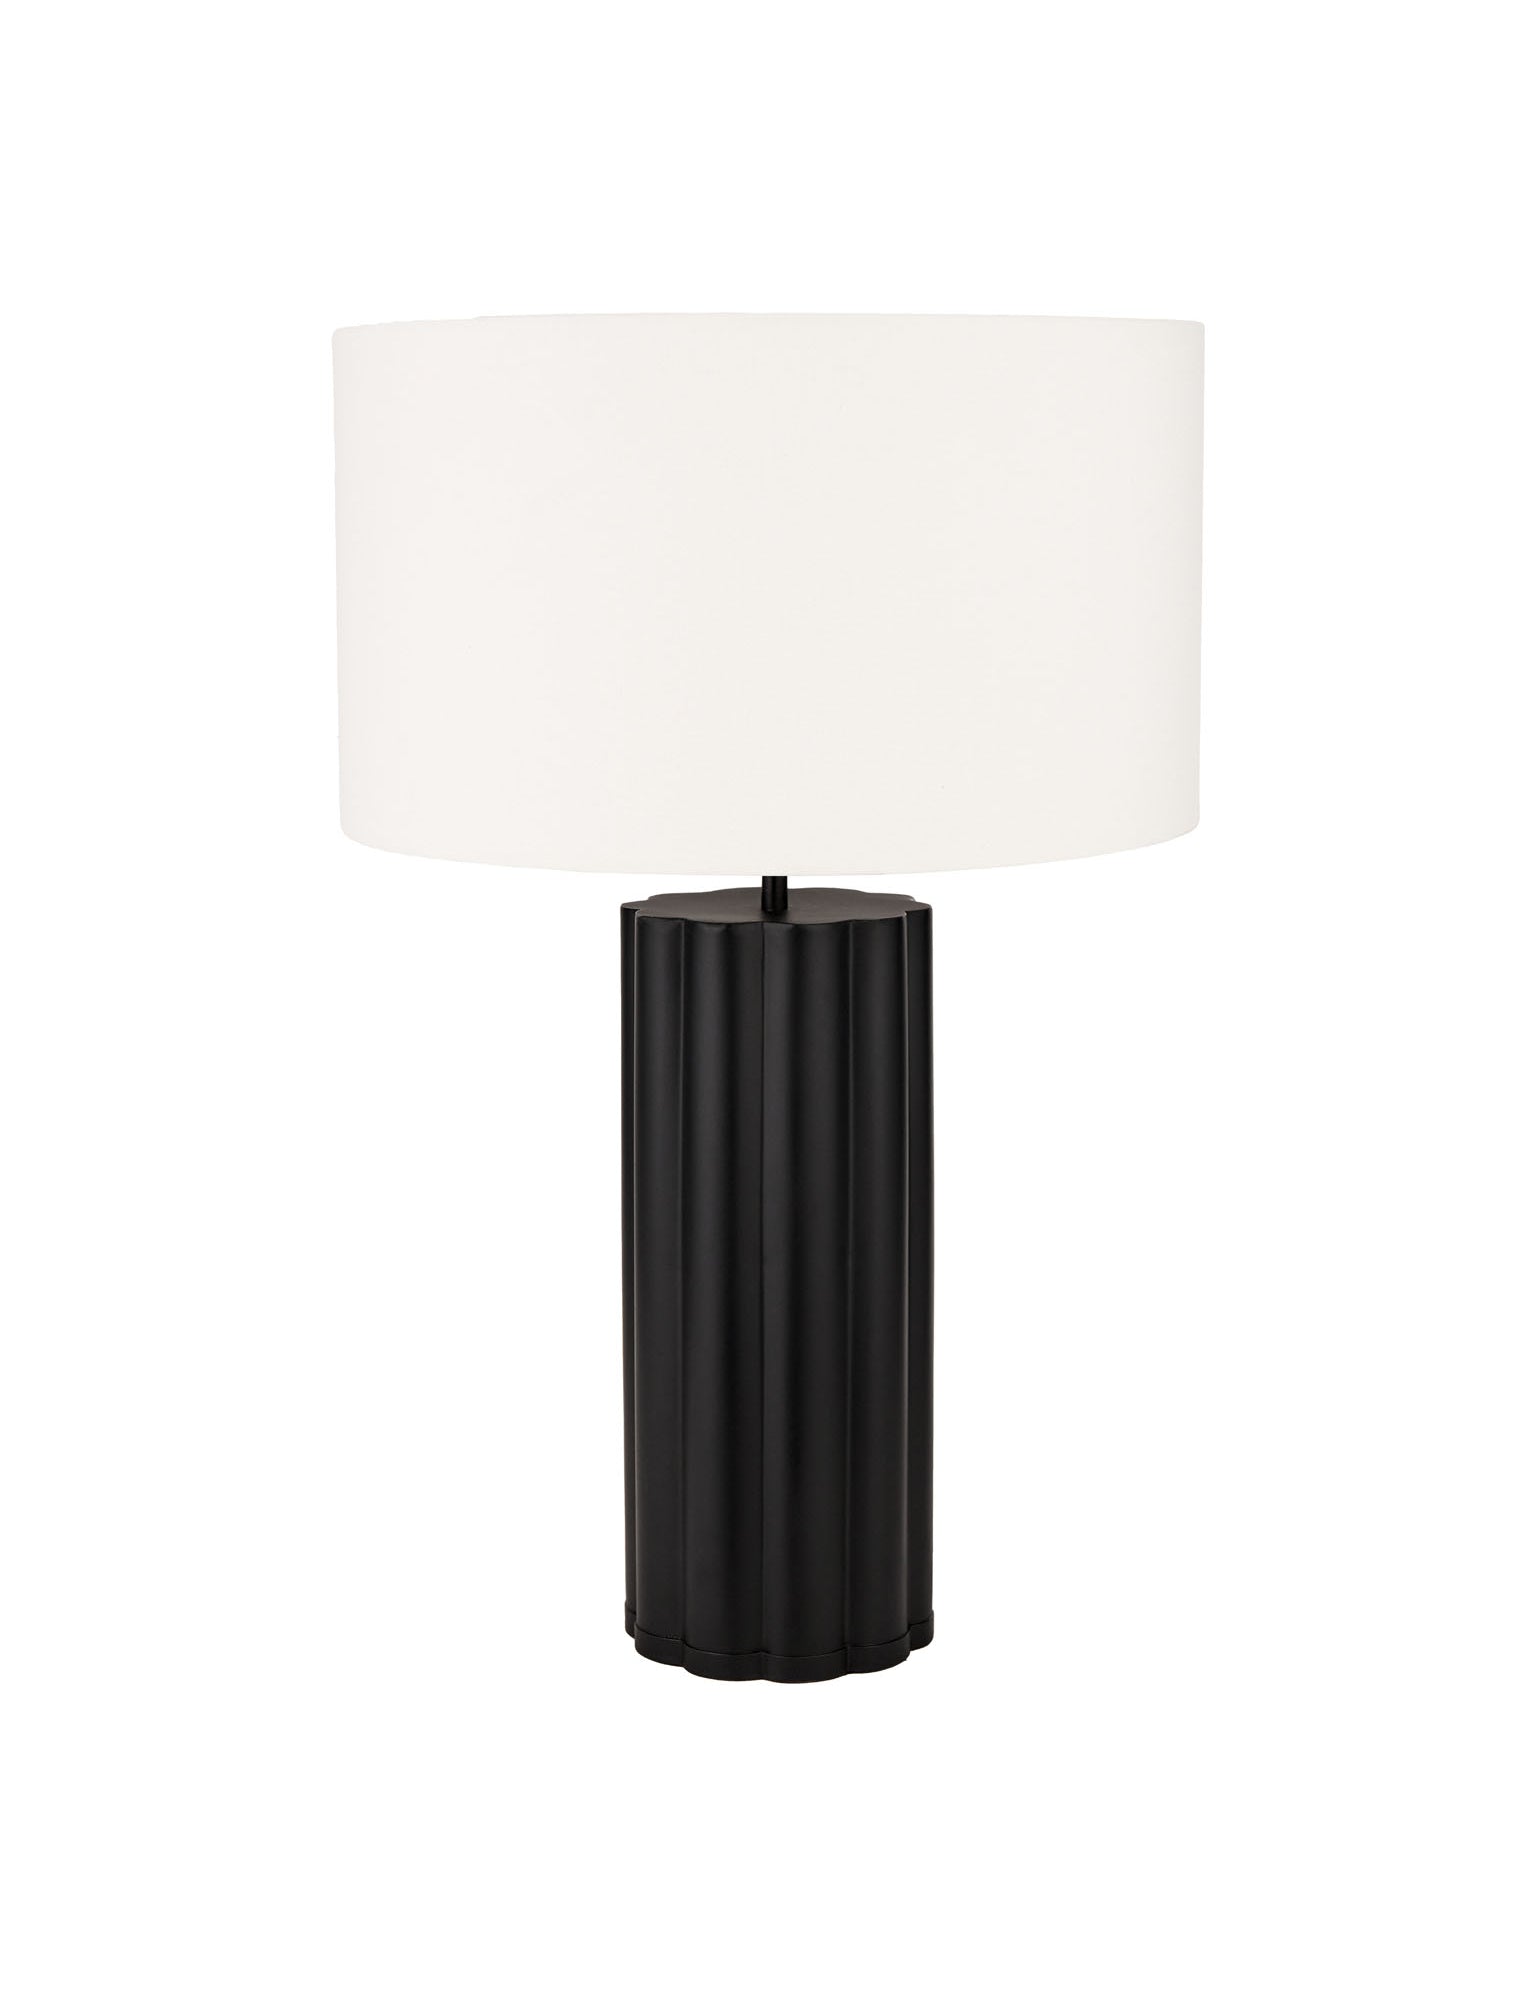 black metal base with a white cylinder shade